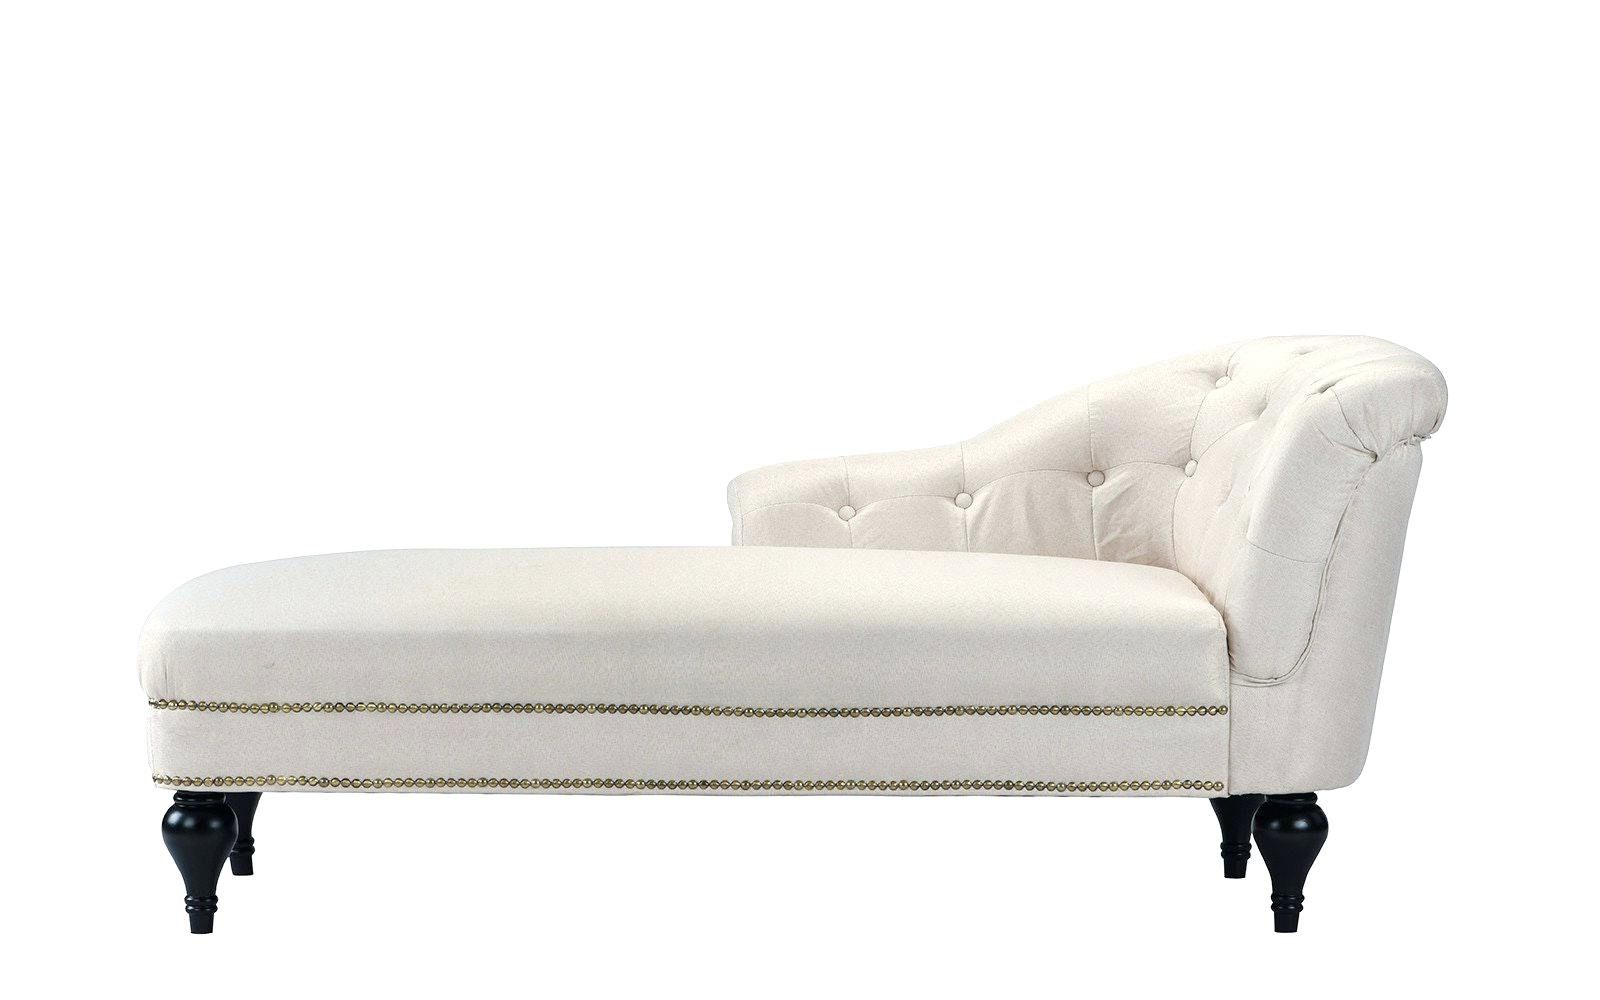 Alessia Chaise Lounge Chair Tufted • Lounge Chairs Ideas Pertaining To Latest Alessia Chaise Lounge Tufted Chairs (View 2 of 15)